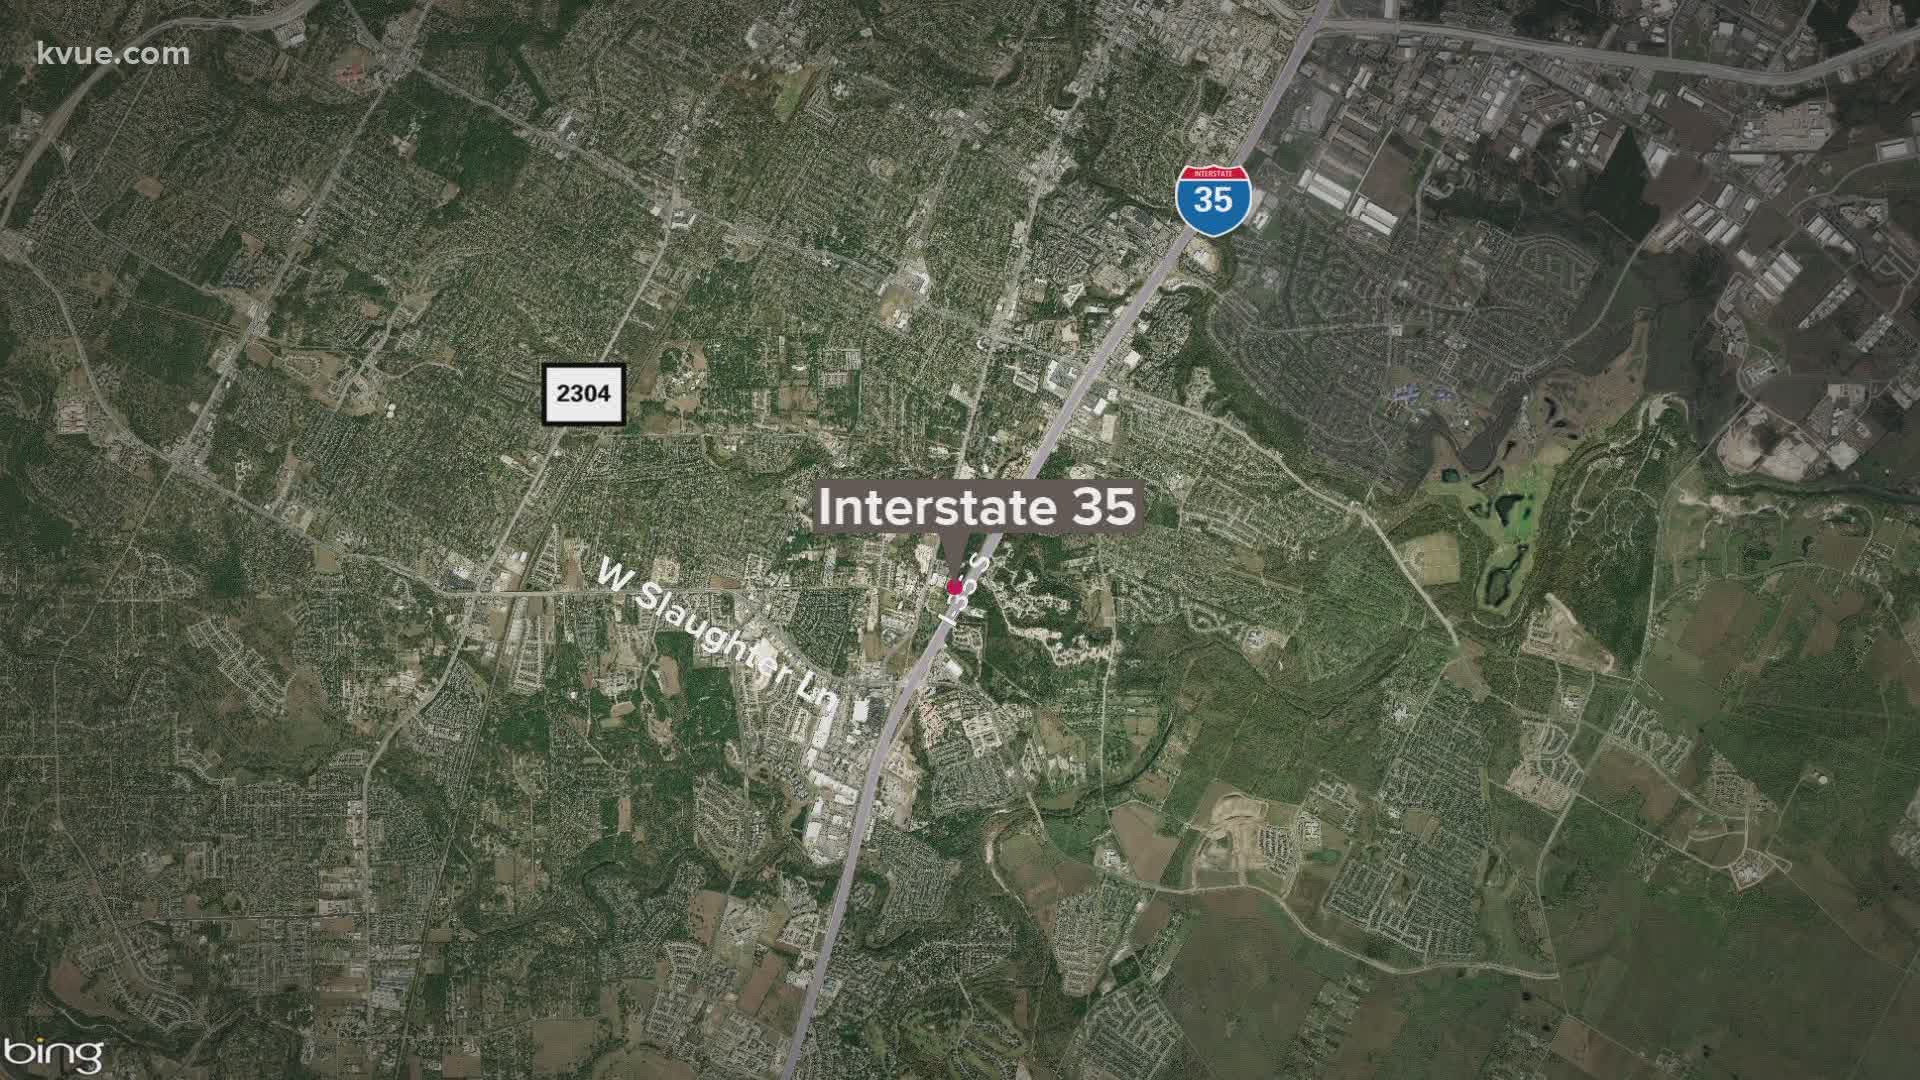 One person is dead after a multi-vehicle crash on Insterstate 35 in South Austin.